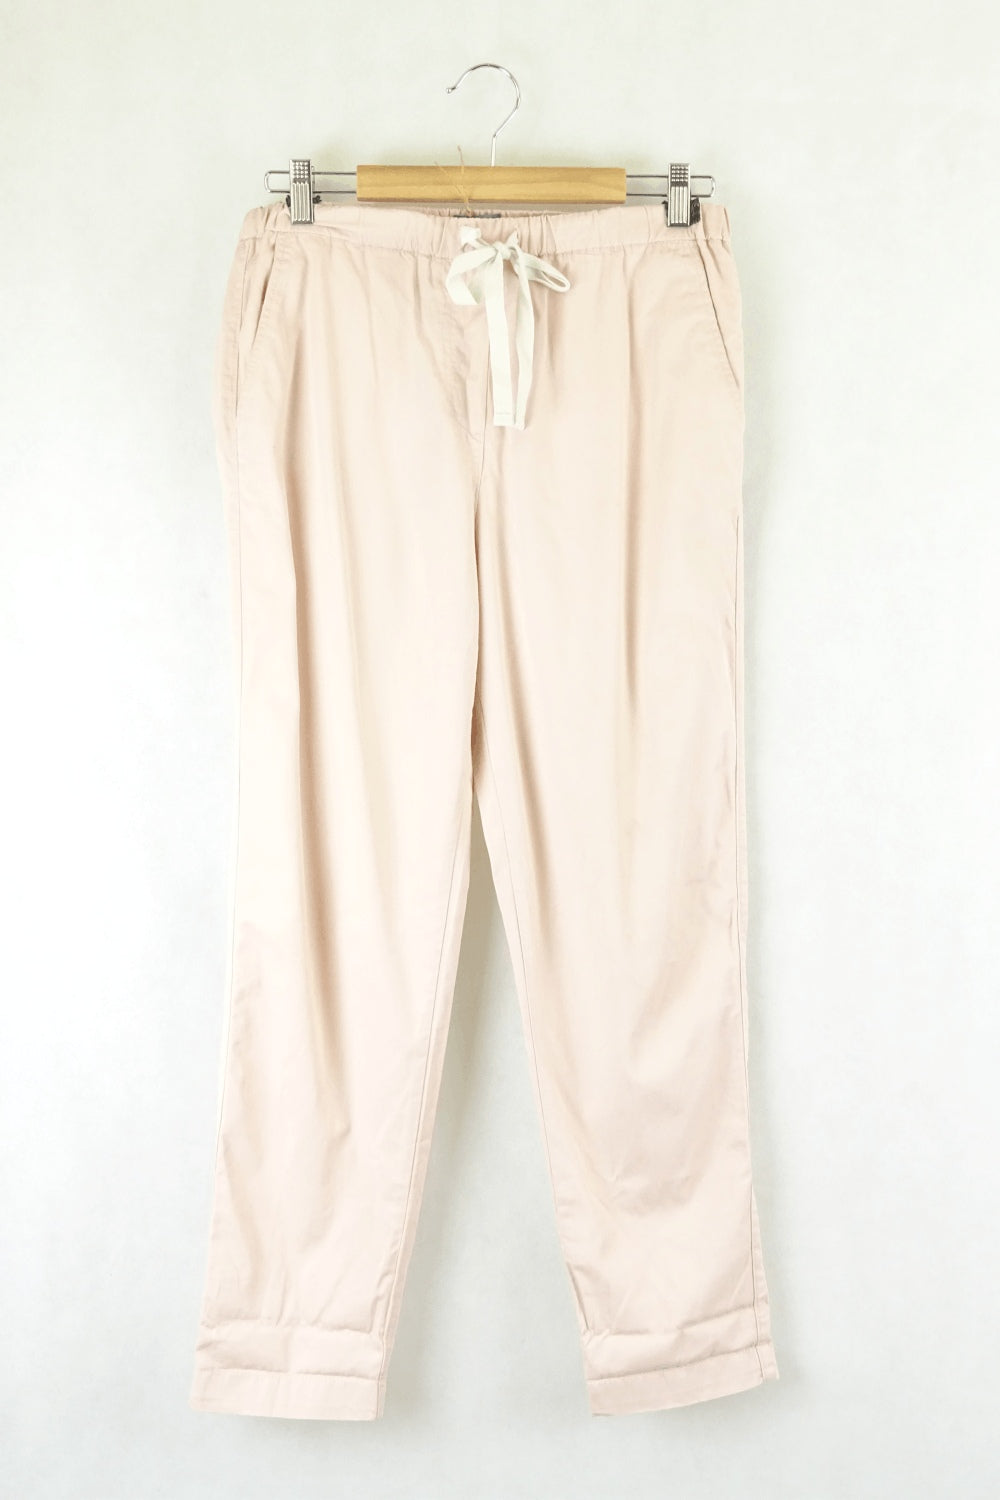 Sussan Pink C Ropped Pants 8